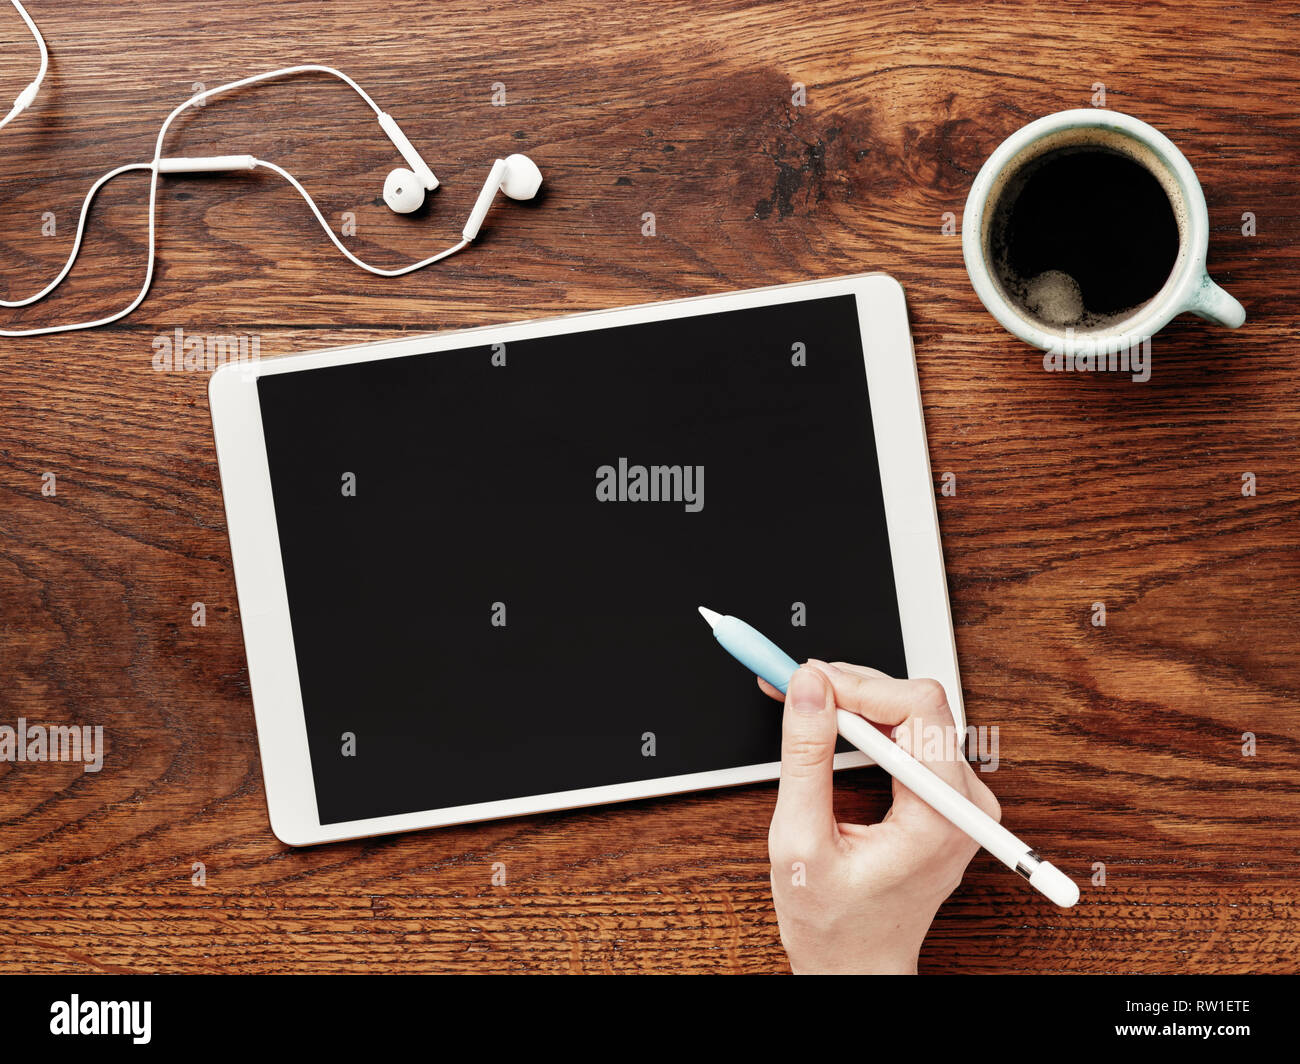 Digital tablet and cup of coffee on a wooden table. A pencil in hand. Calligraphy and lettering mockup. Flat lay. Stock Photo